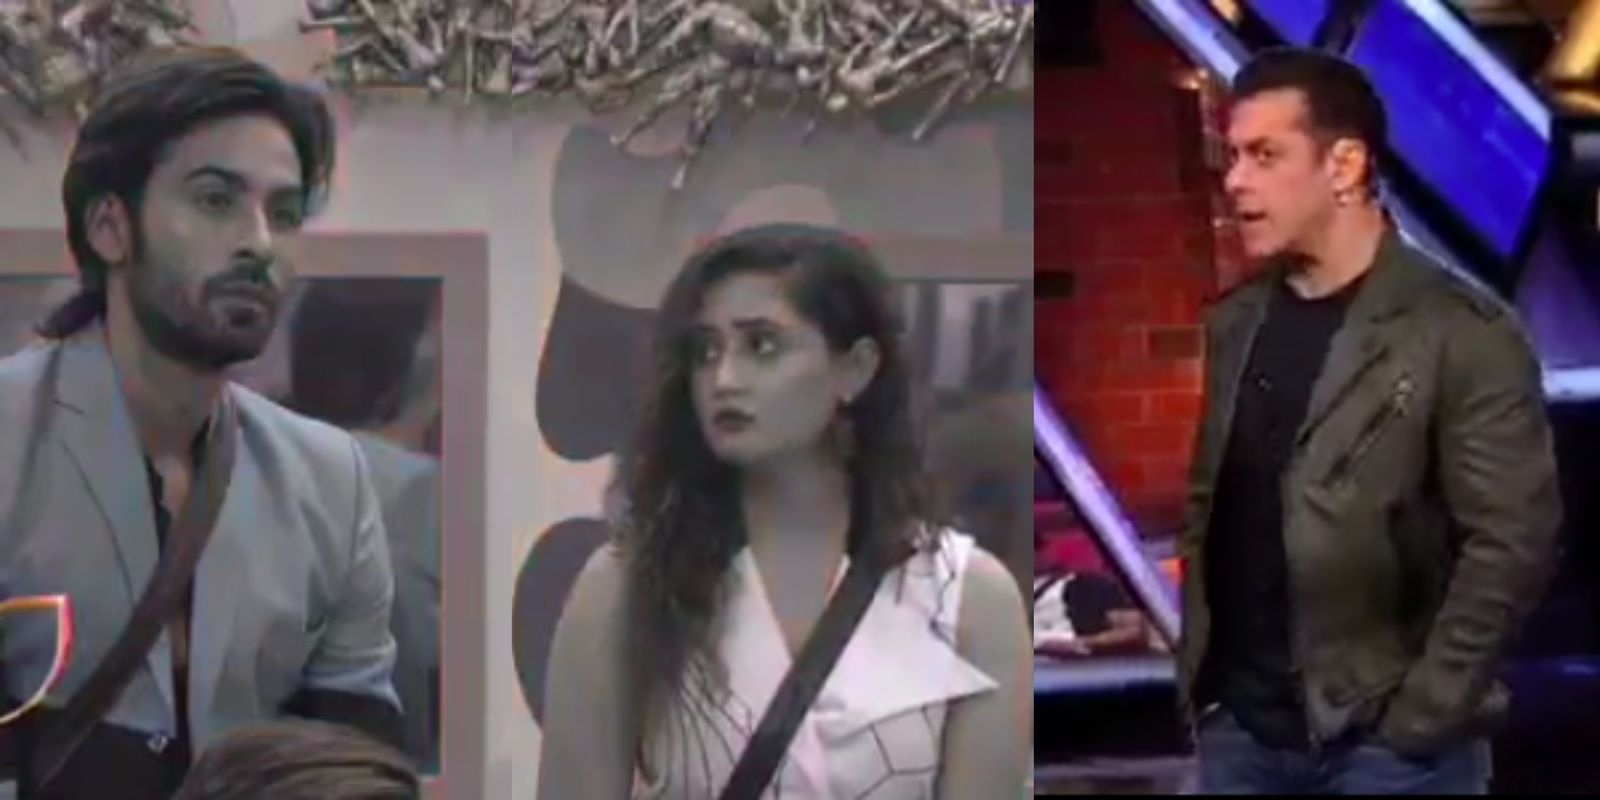 Bigg Boss 13 Preview: An Angry Salman Khan Reveals That Arhaan Has A Child As A Baffled Rashami Looks On!